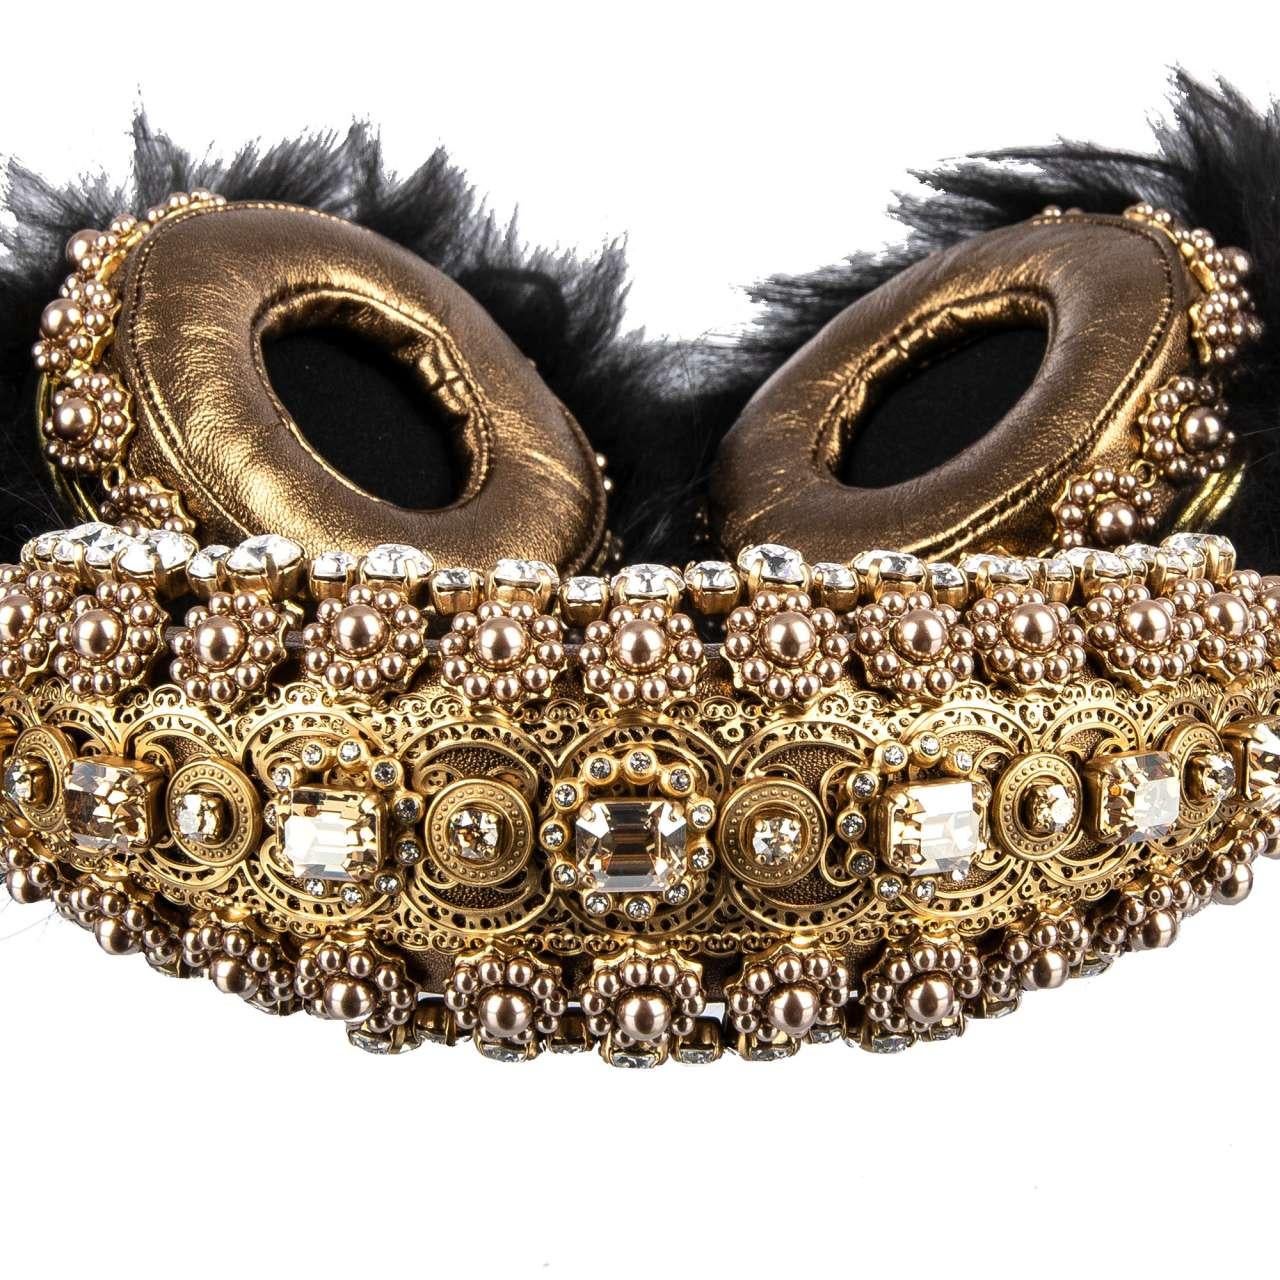 - Exclusive and rare nappa leather Frends headphones with cable, embellished with crystals and pearls metal crown and fox fur in gold and black by Dolce & Gabbana Black Line - RUNWAY - Dolce&Gabbana Fashion Show - New with Tag - Packed in a special